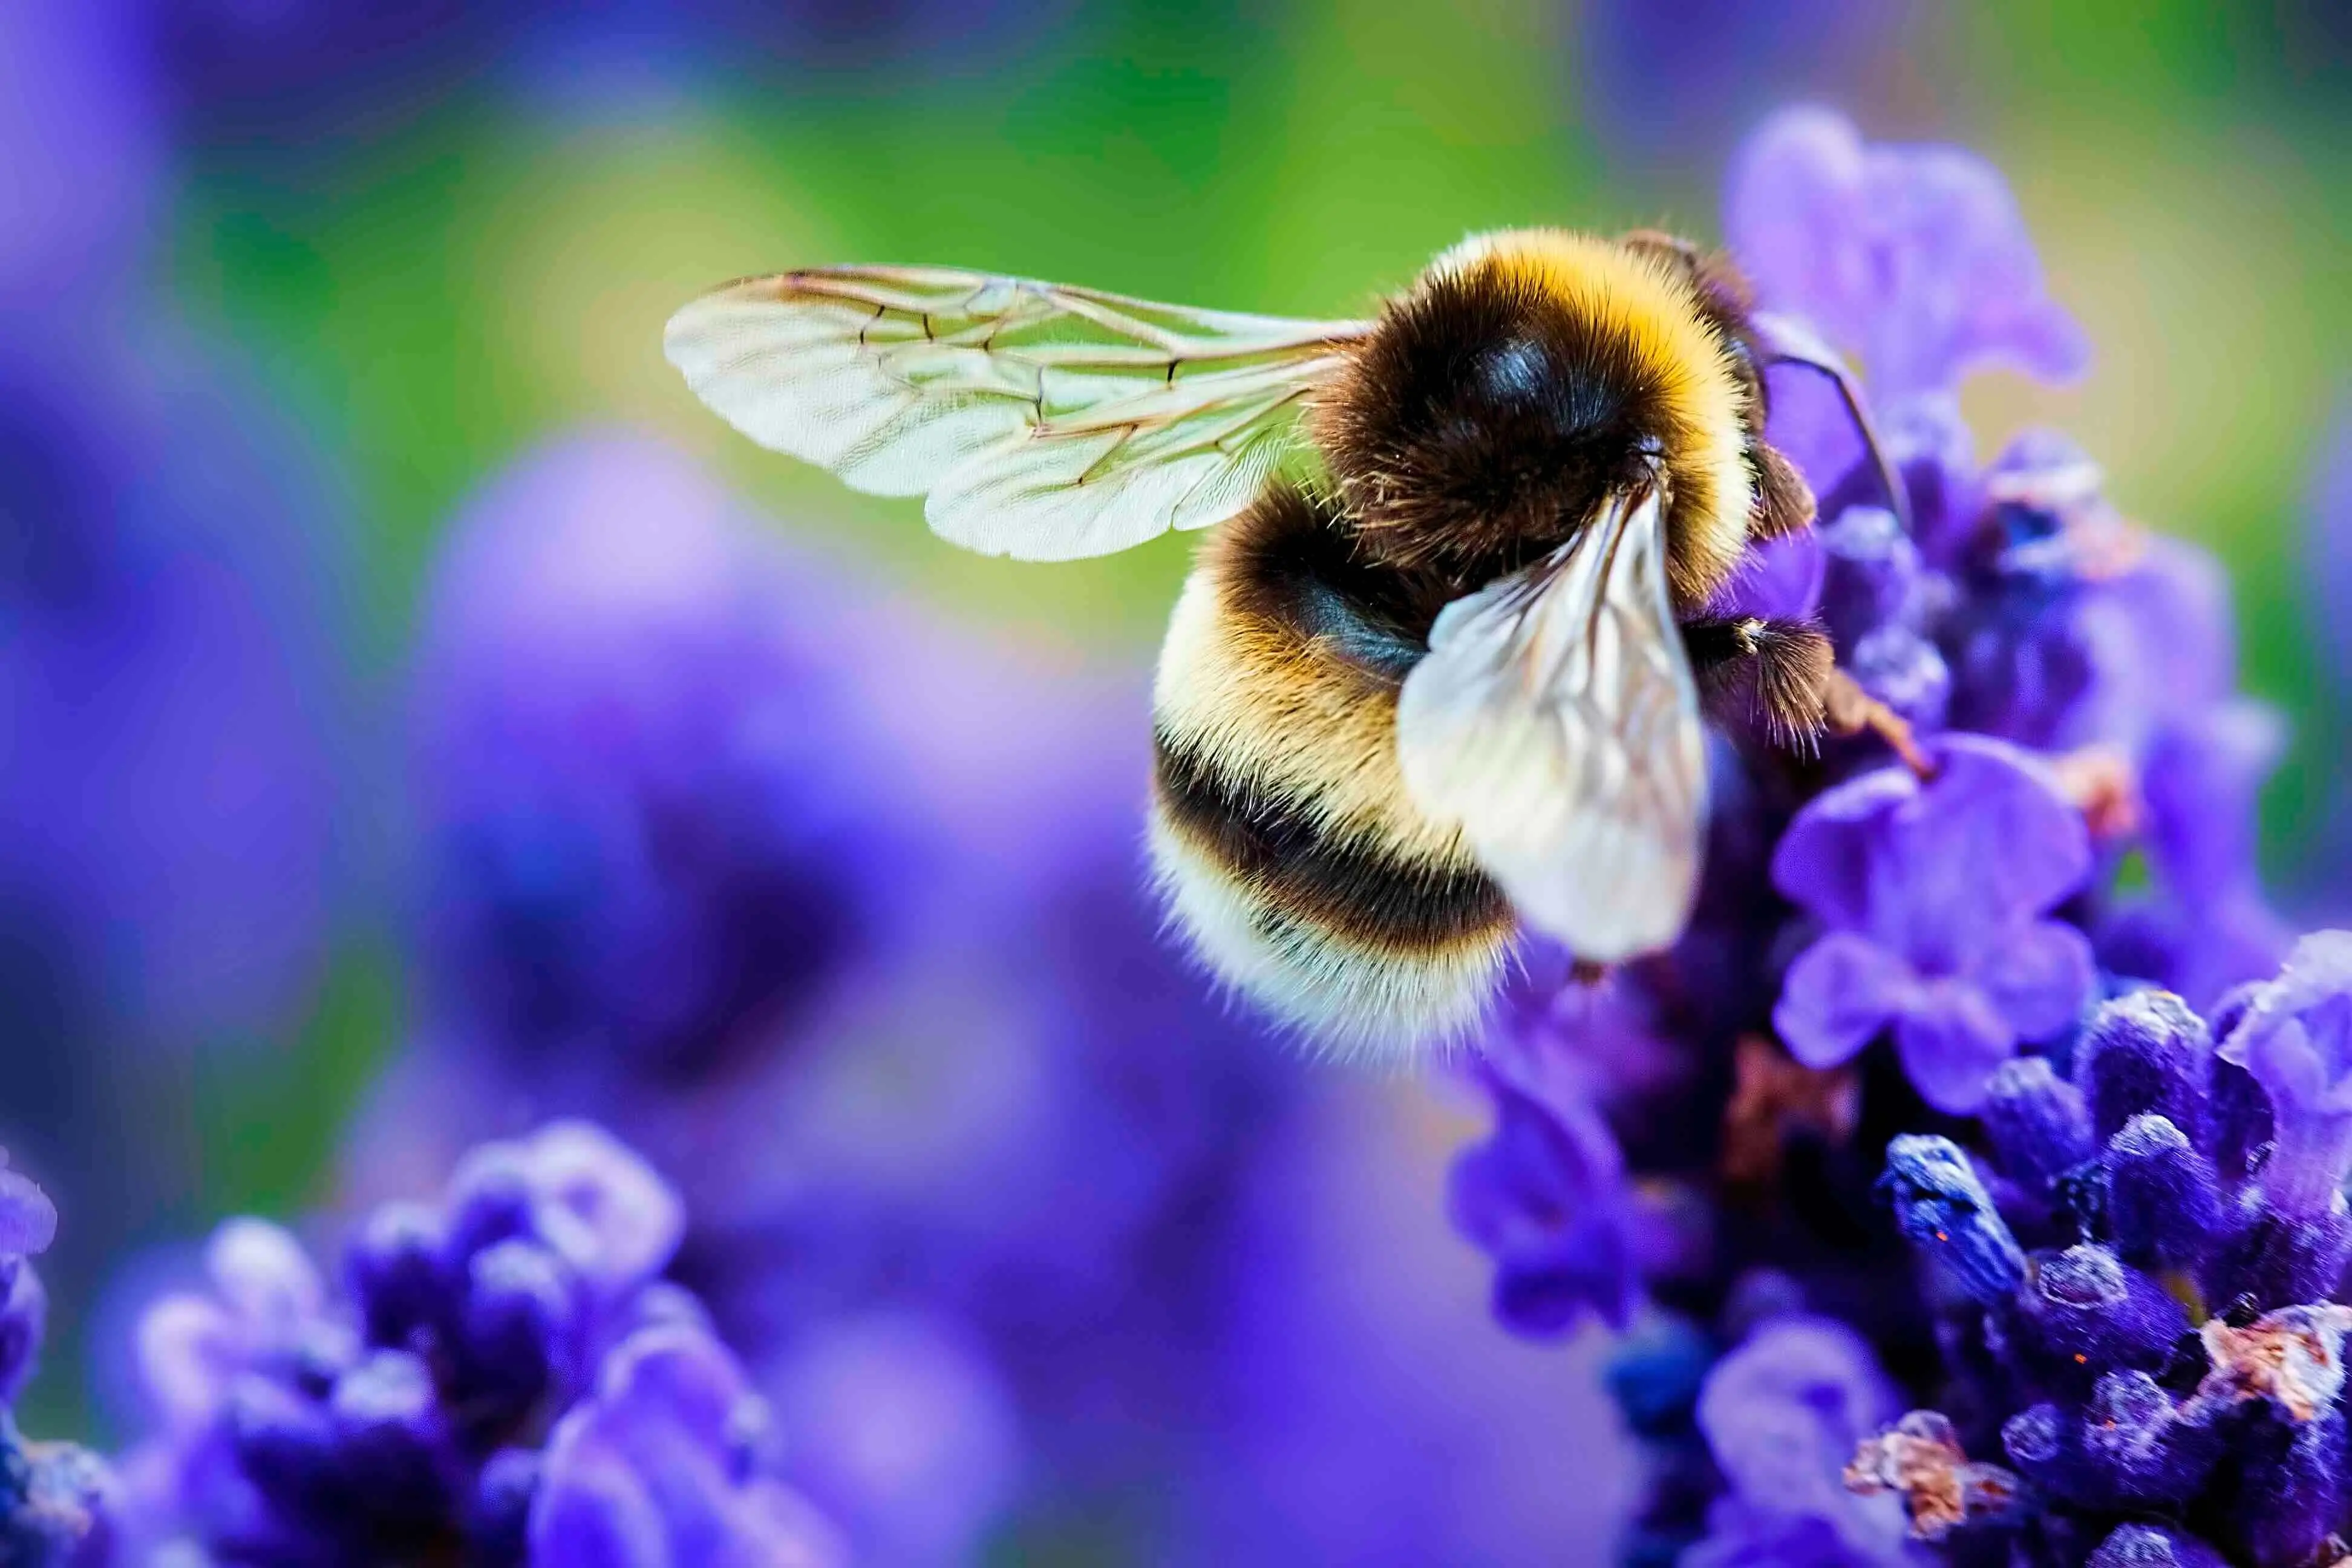 A bumblebee on a cluster of purple flowers